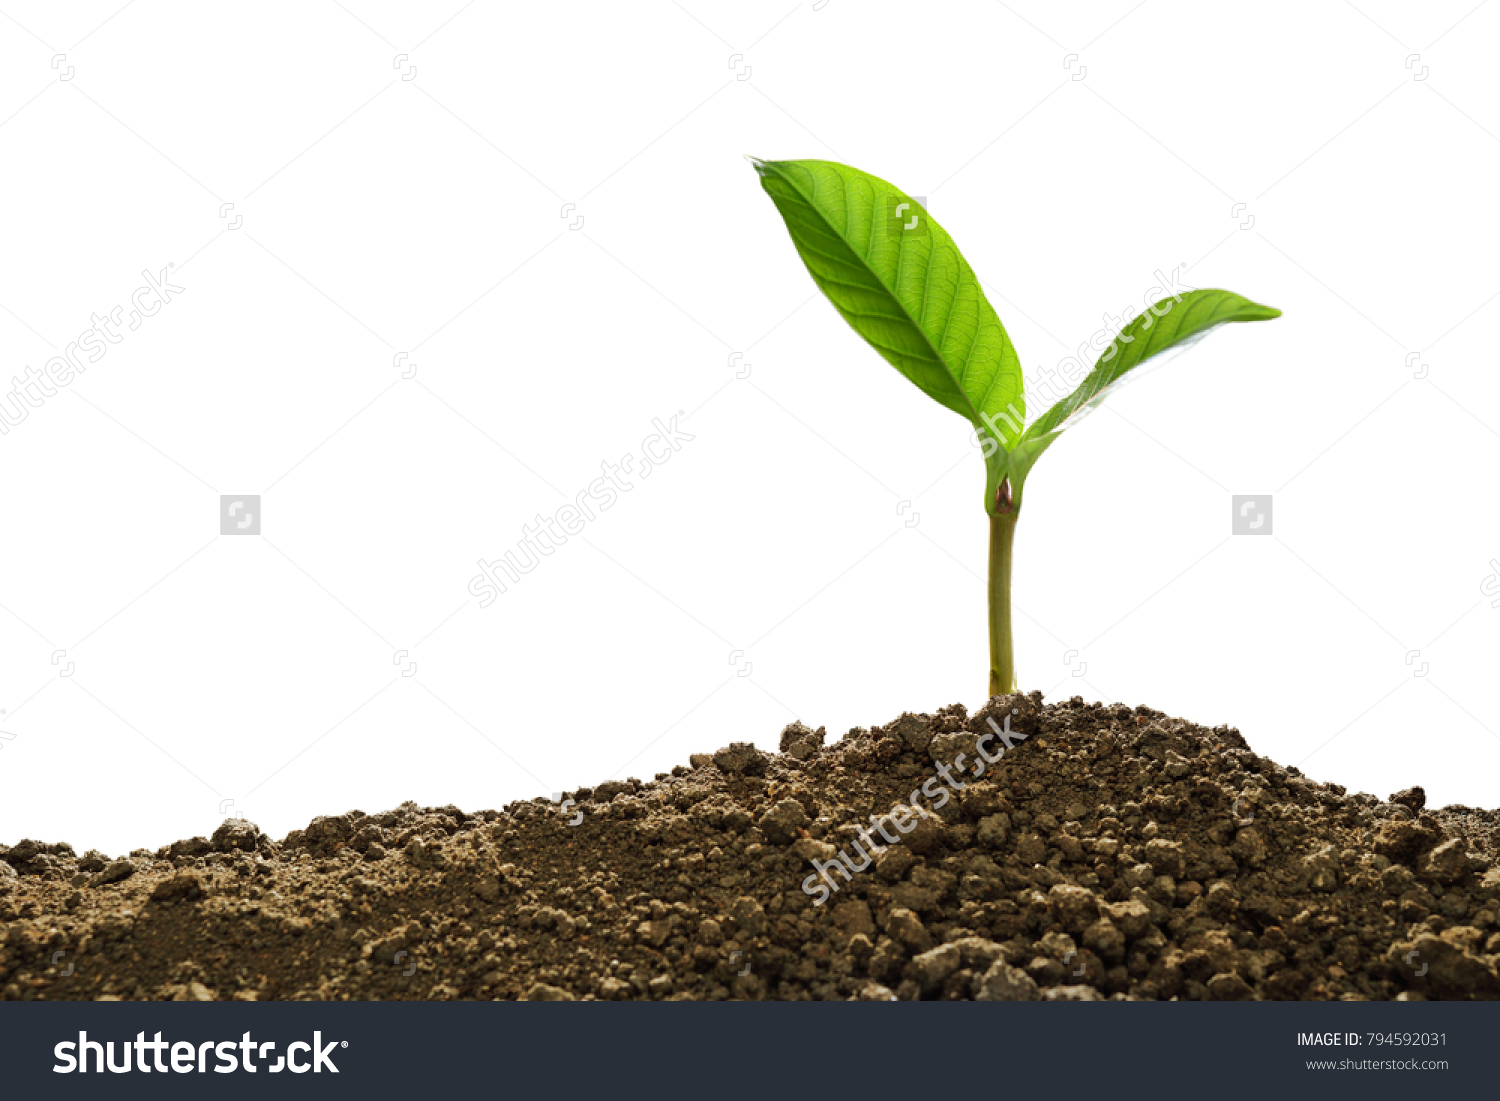 Green sprout growing out from soil isolated on white background #794592031